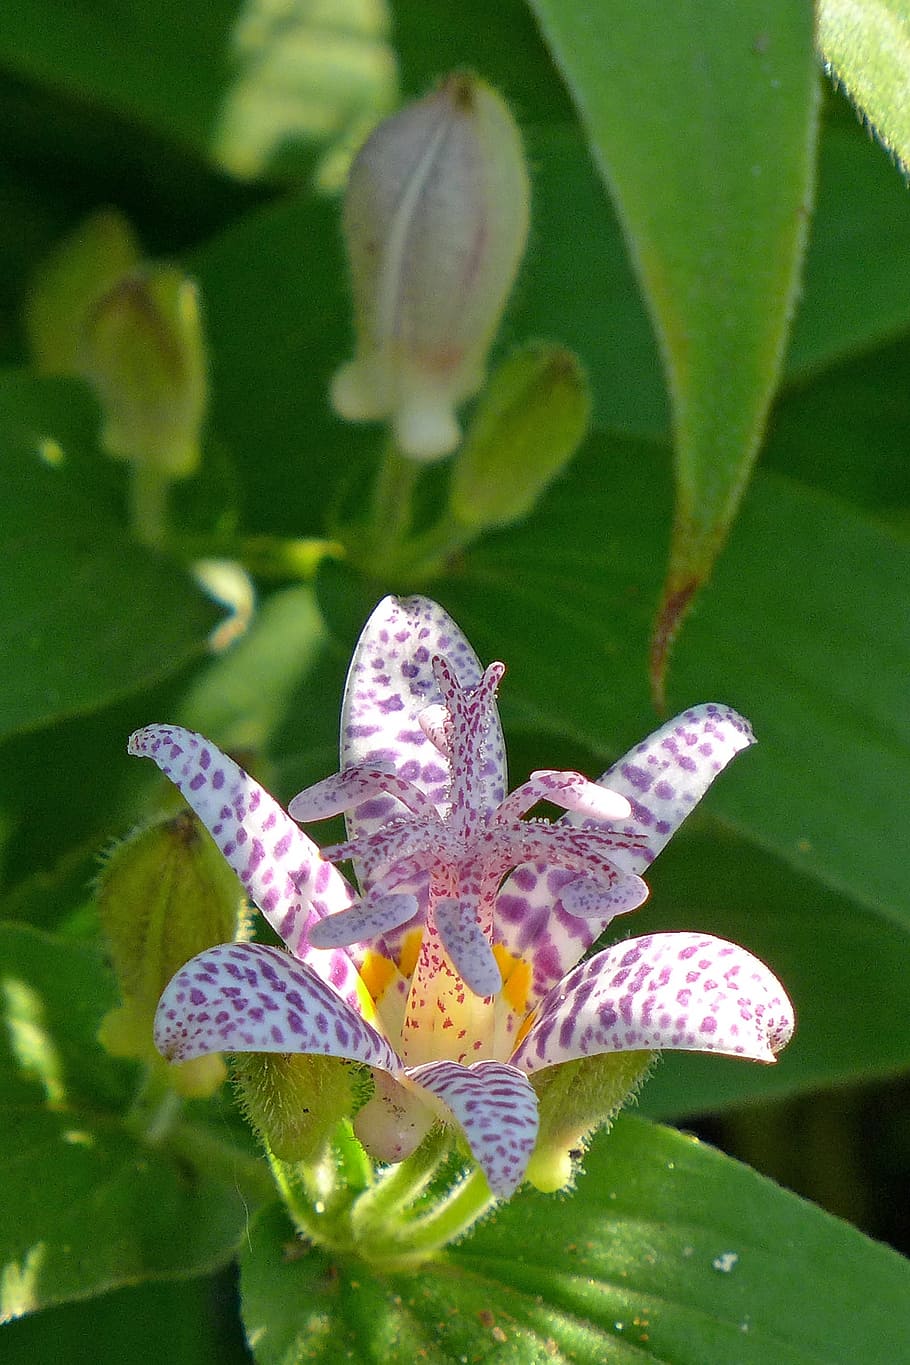 Toad lily is a shade loving perennial plant with orchid-like flowers that come into bloom in late summer-early fall.